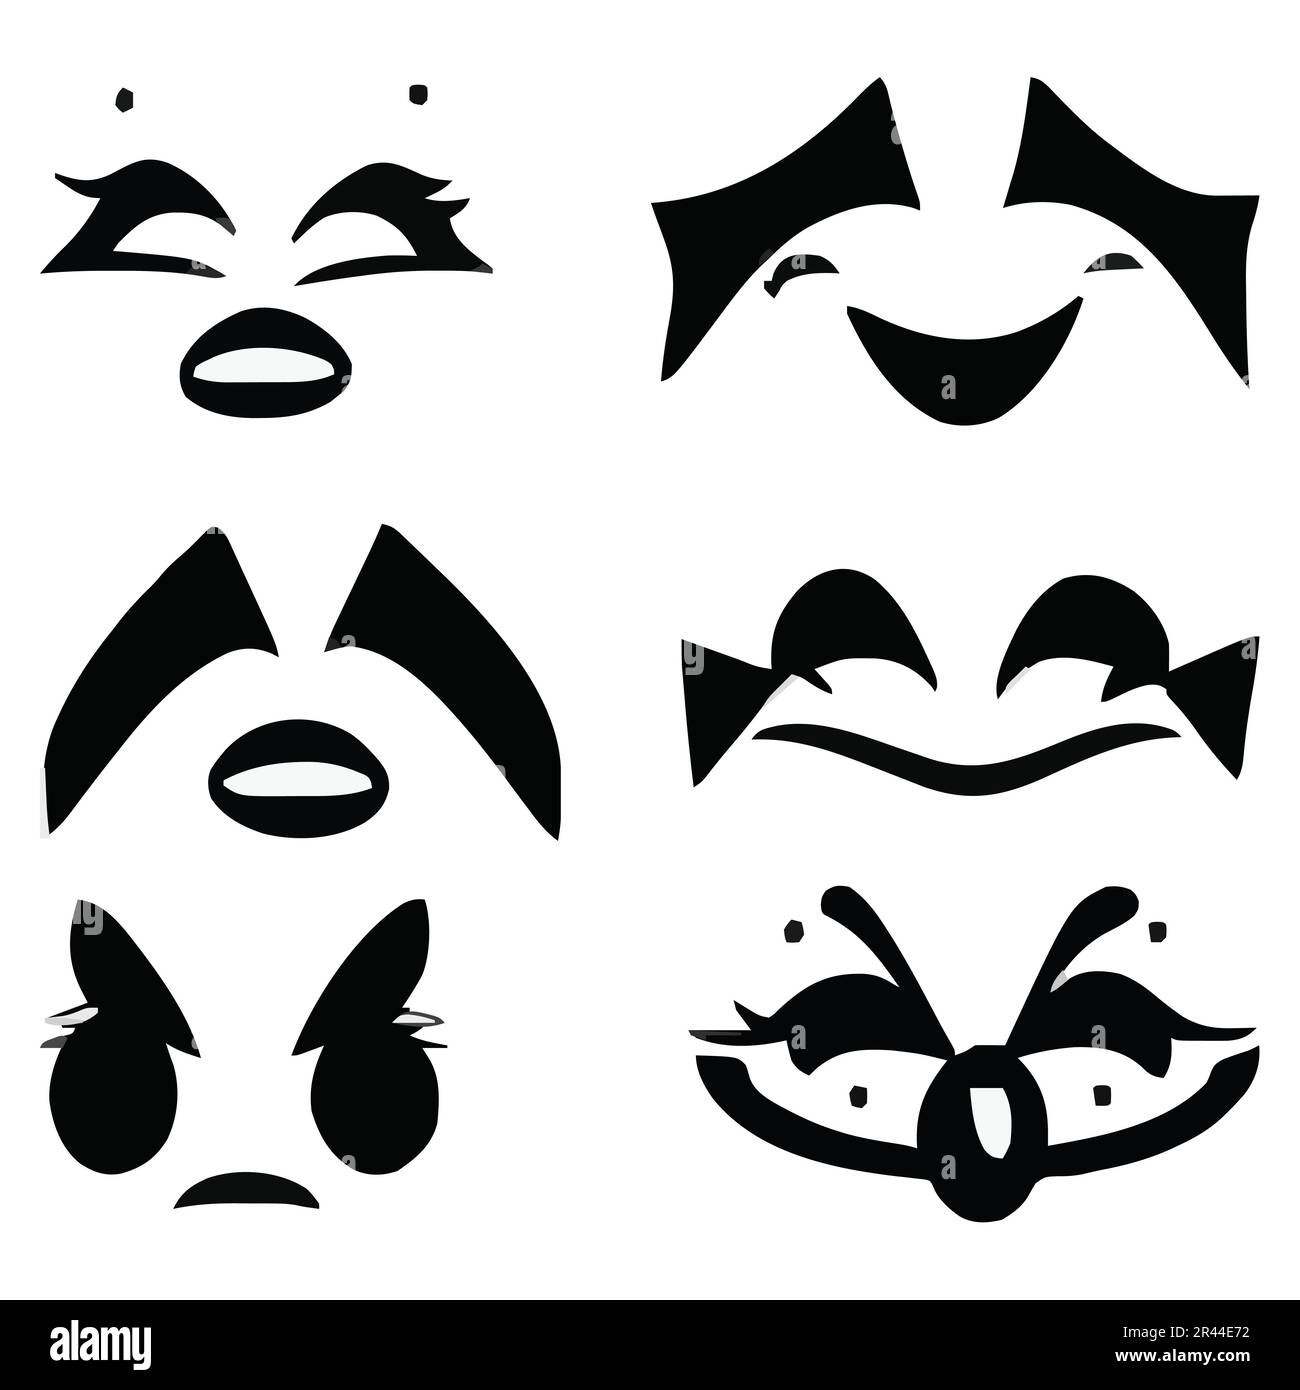 Set of eyes and face expressions Stock Vector